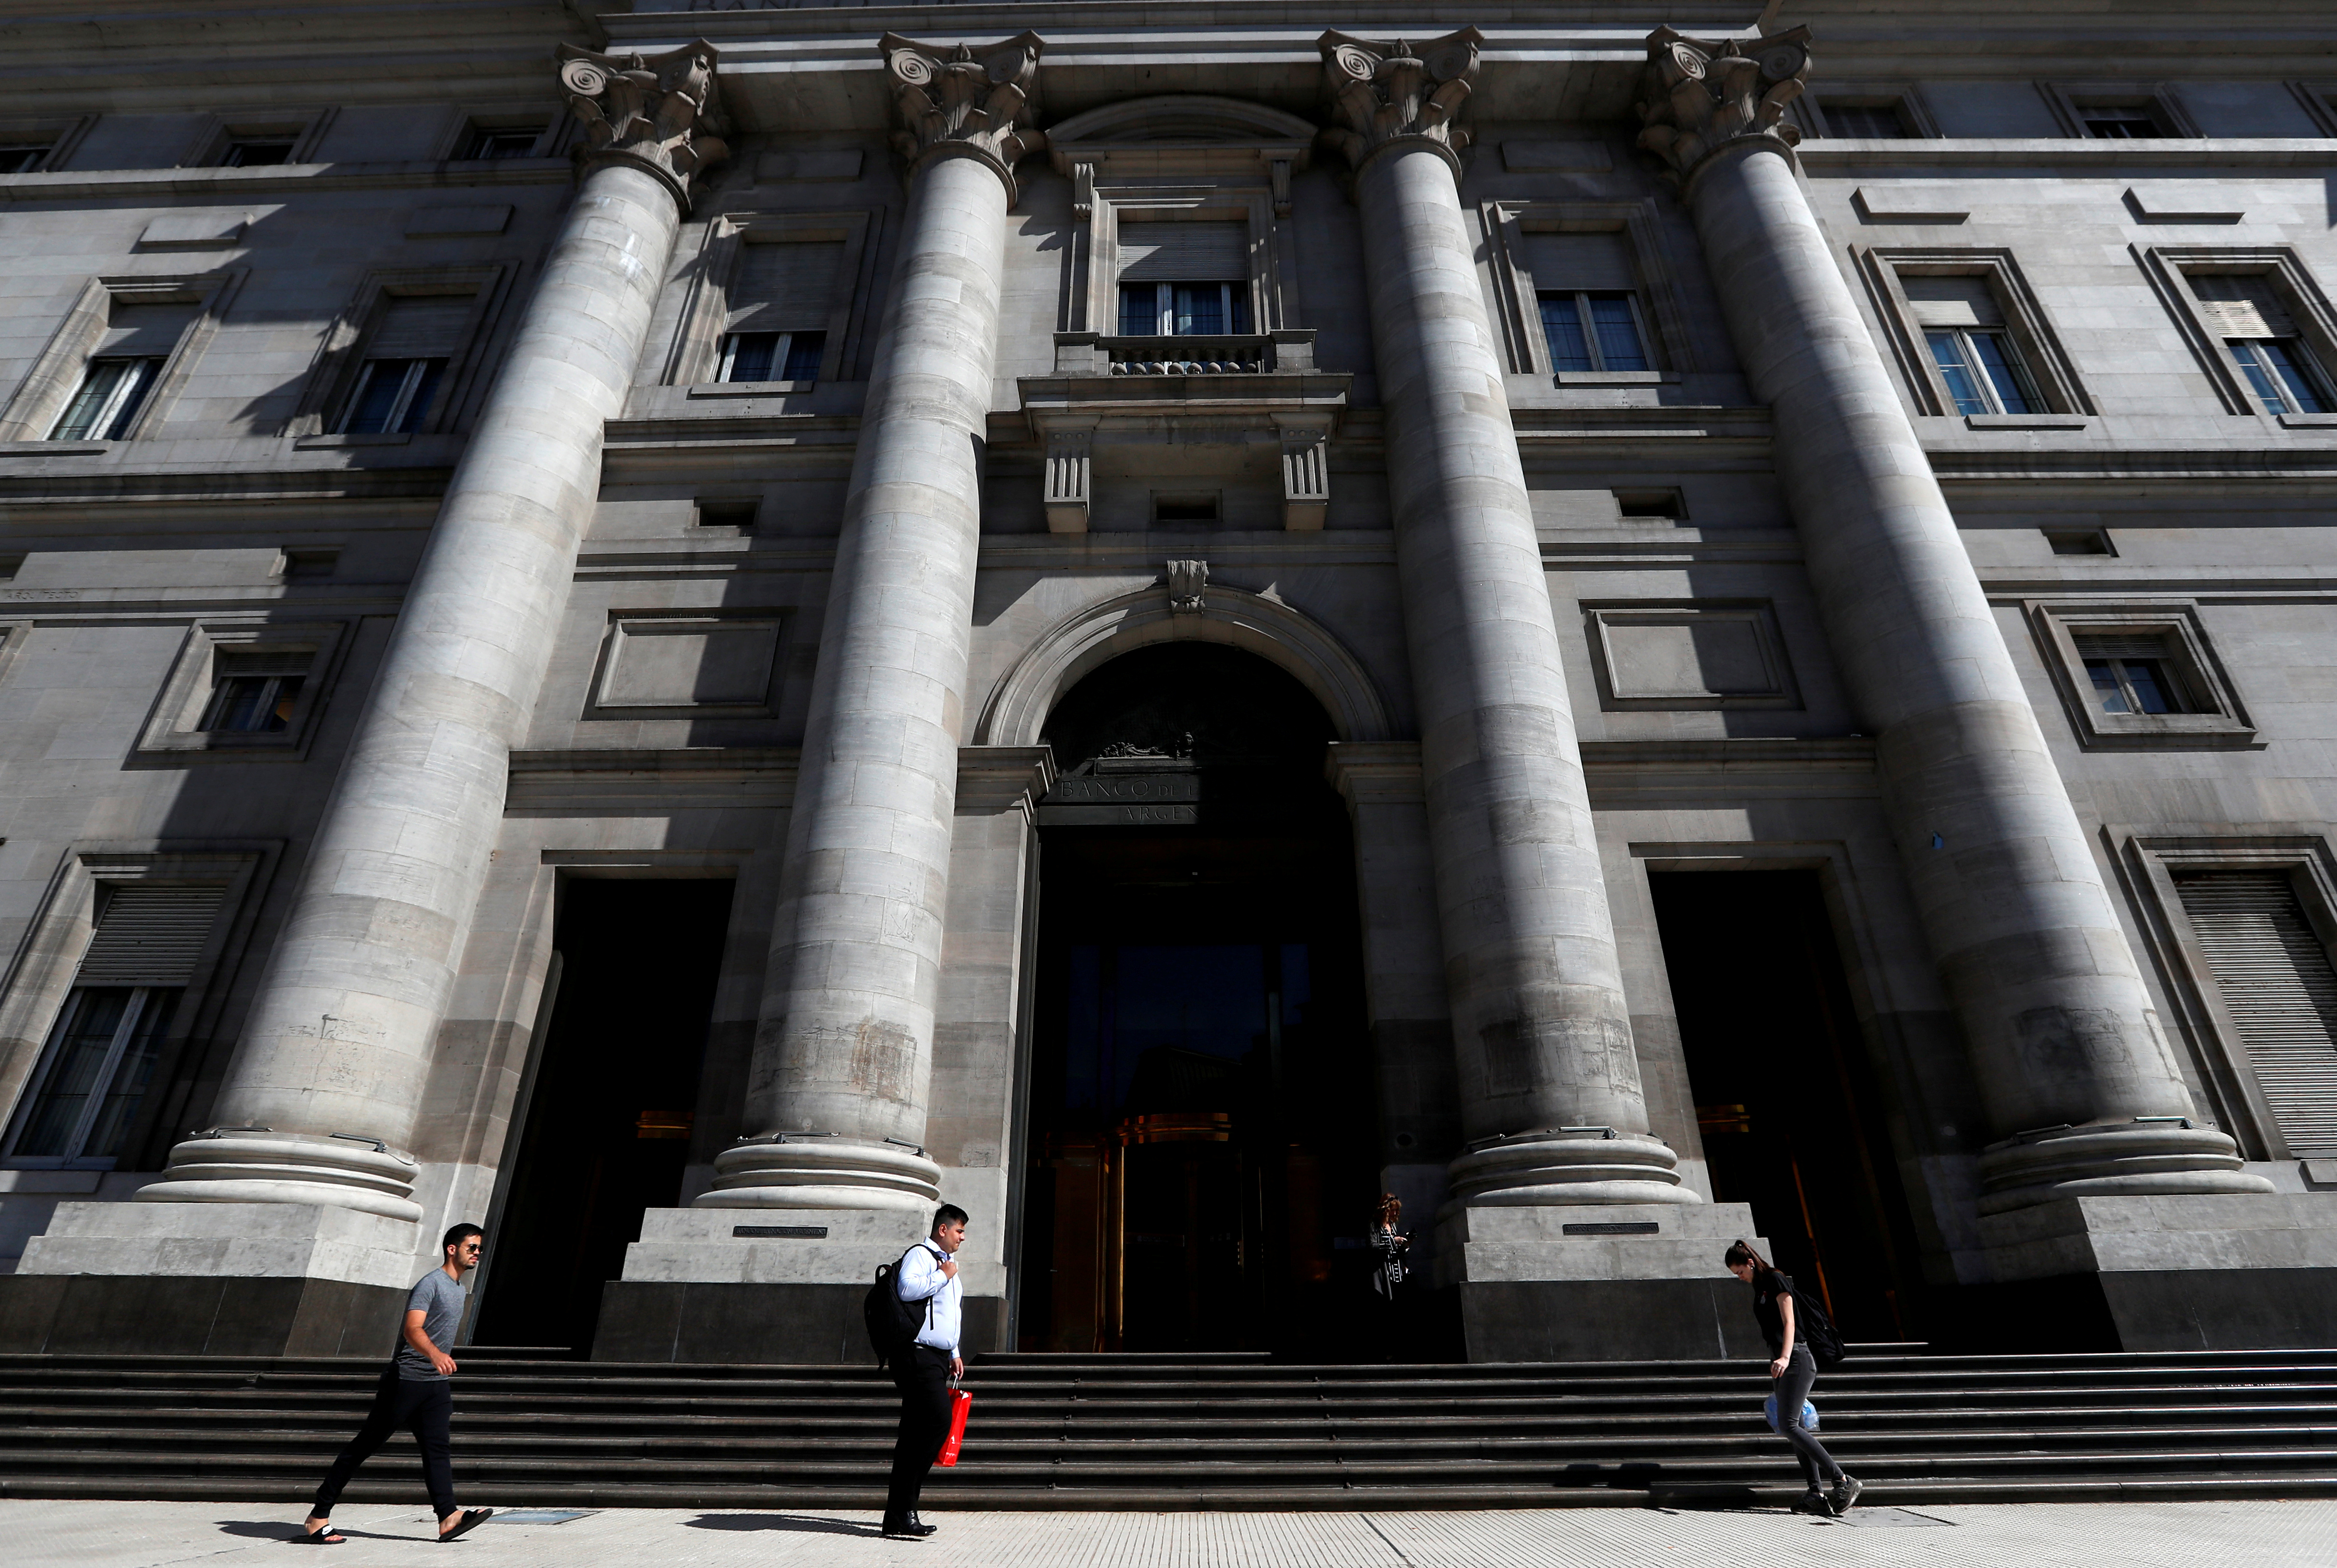 Pedestrians walk past the facade of Argentina's Banco Nacion (National Bank), in Buenos Aires, Argentina February 19, 2020. Picture taken February 19, 2020. REUTERS/Agustin Marcarian/File Photo